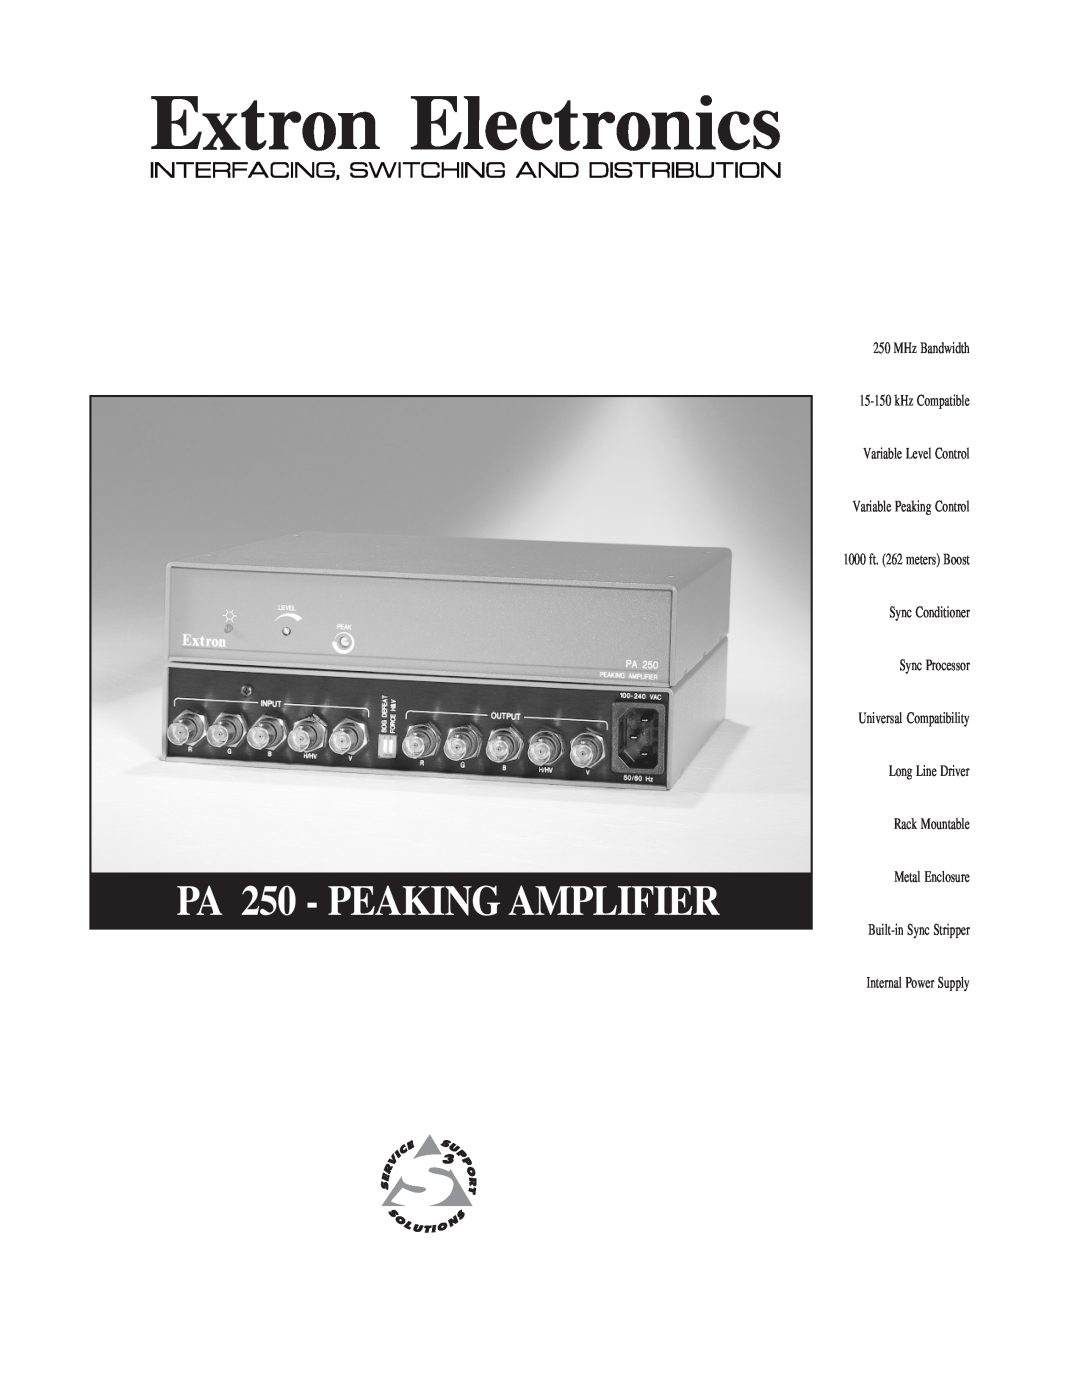 Extron electronic manual PA 250 - PEAKING AMPLIFIER, MHz Bandwidth 15-150kHz Compatible 